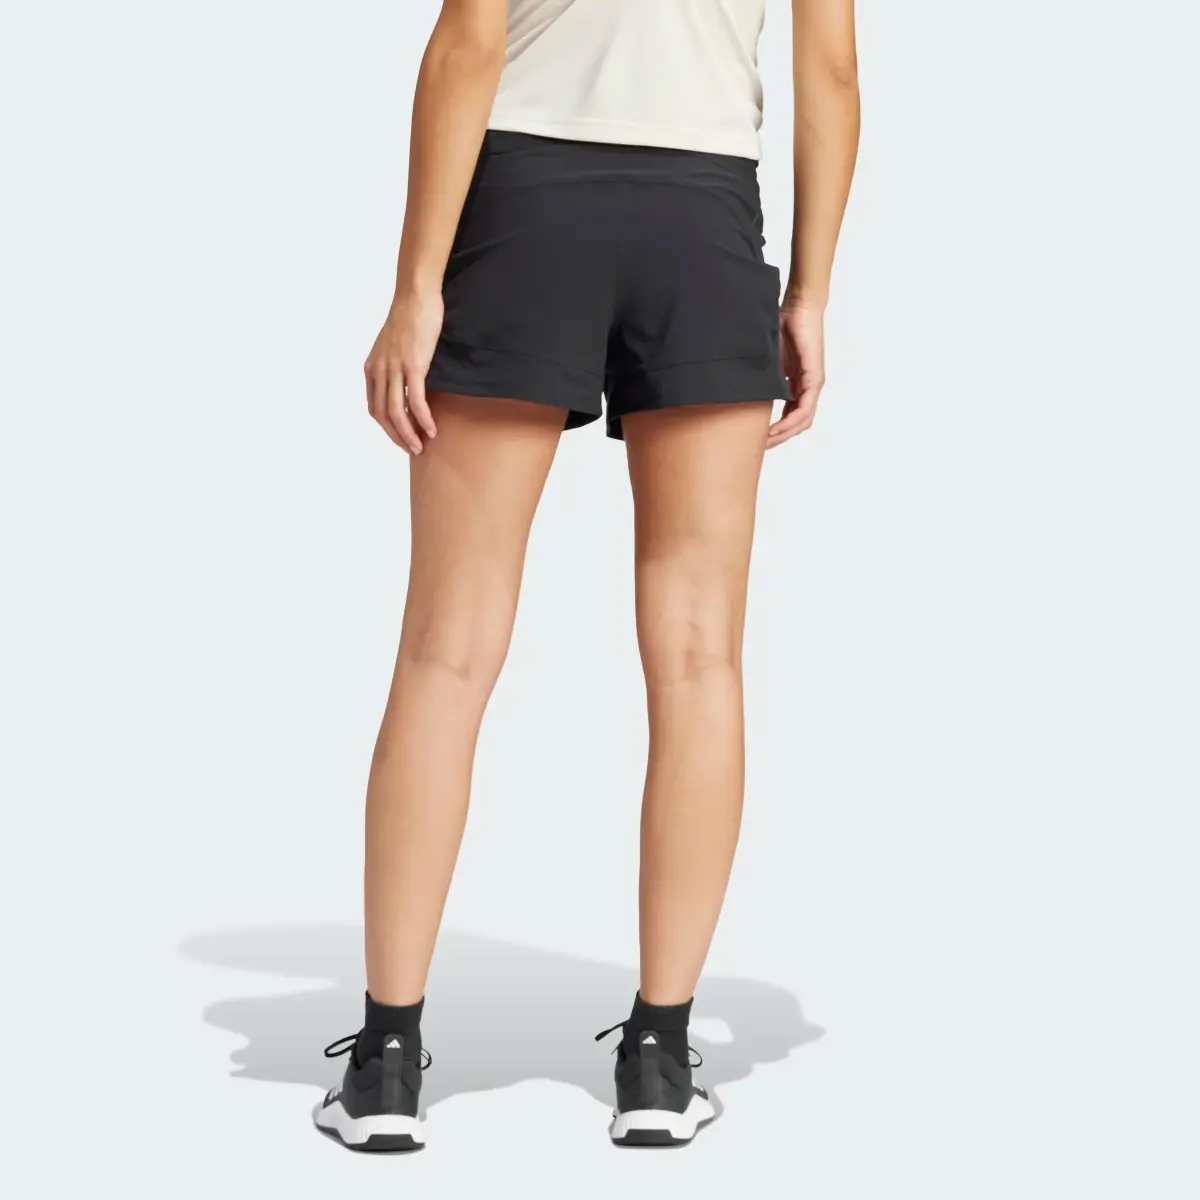 Adidas Pacer Woven Stretch Training Maternity Shorts. 3